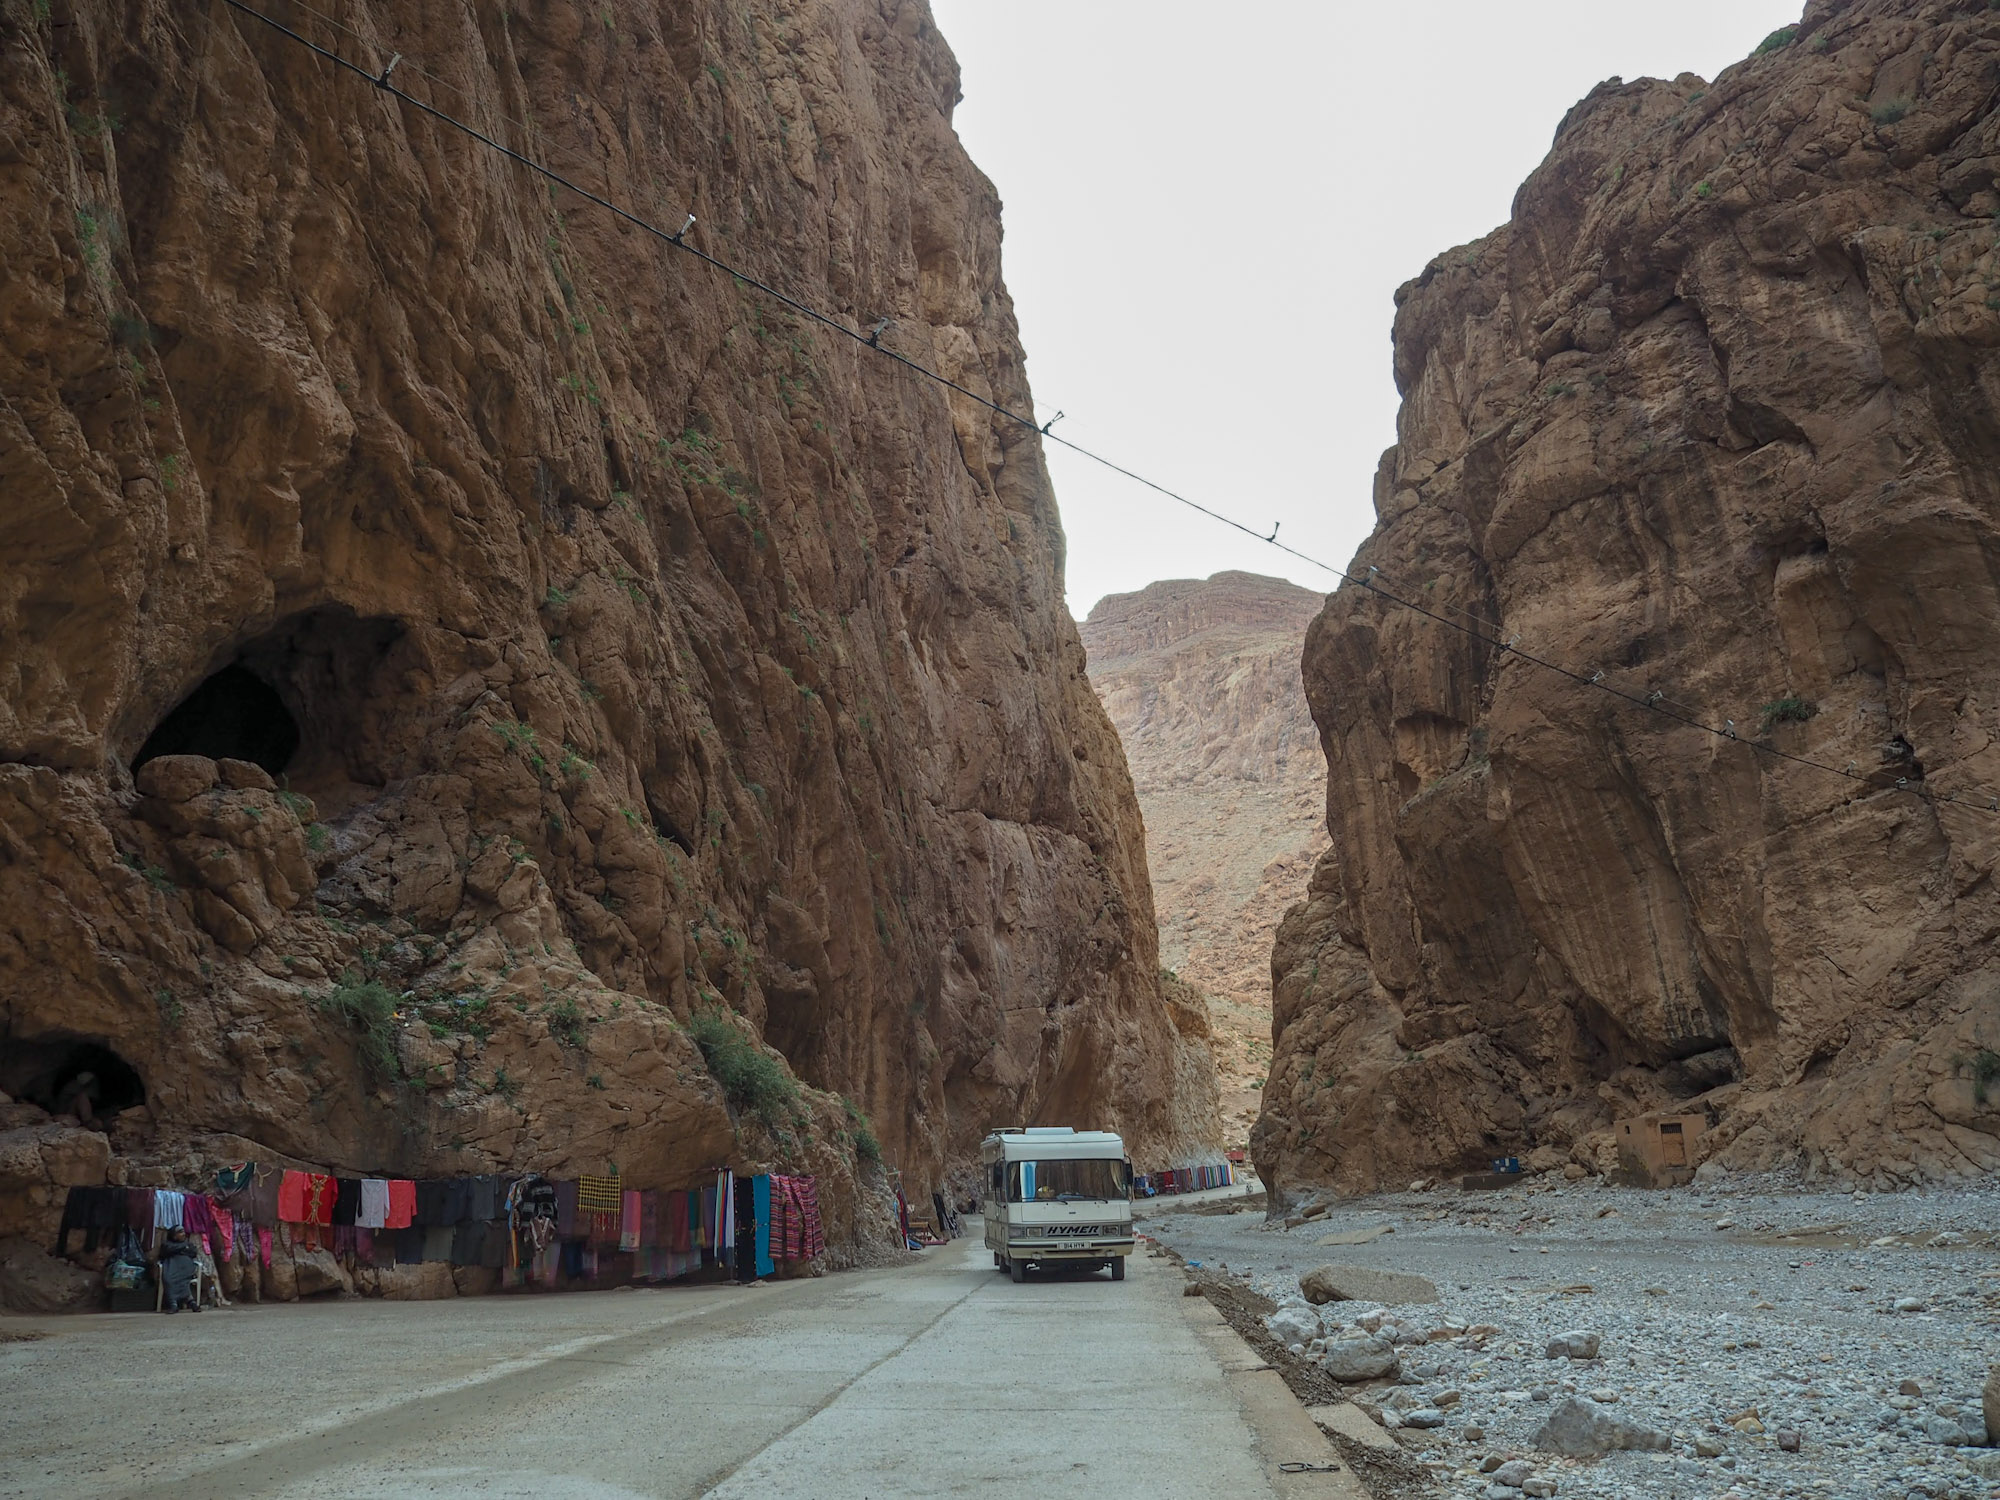 Classic Hymer motorhome driving through the Todra Gorge, Morocco